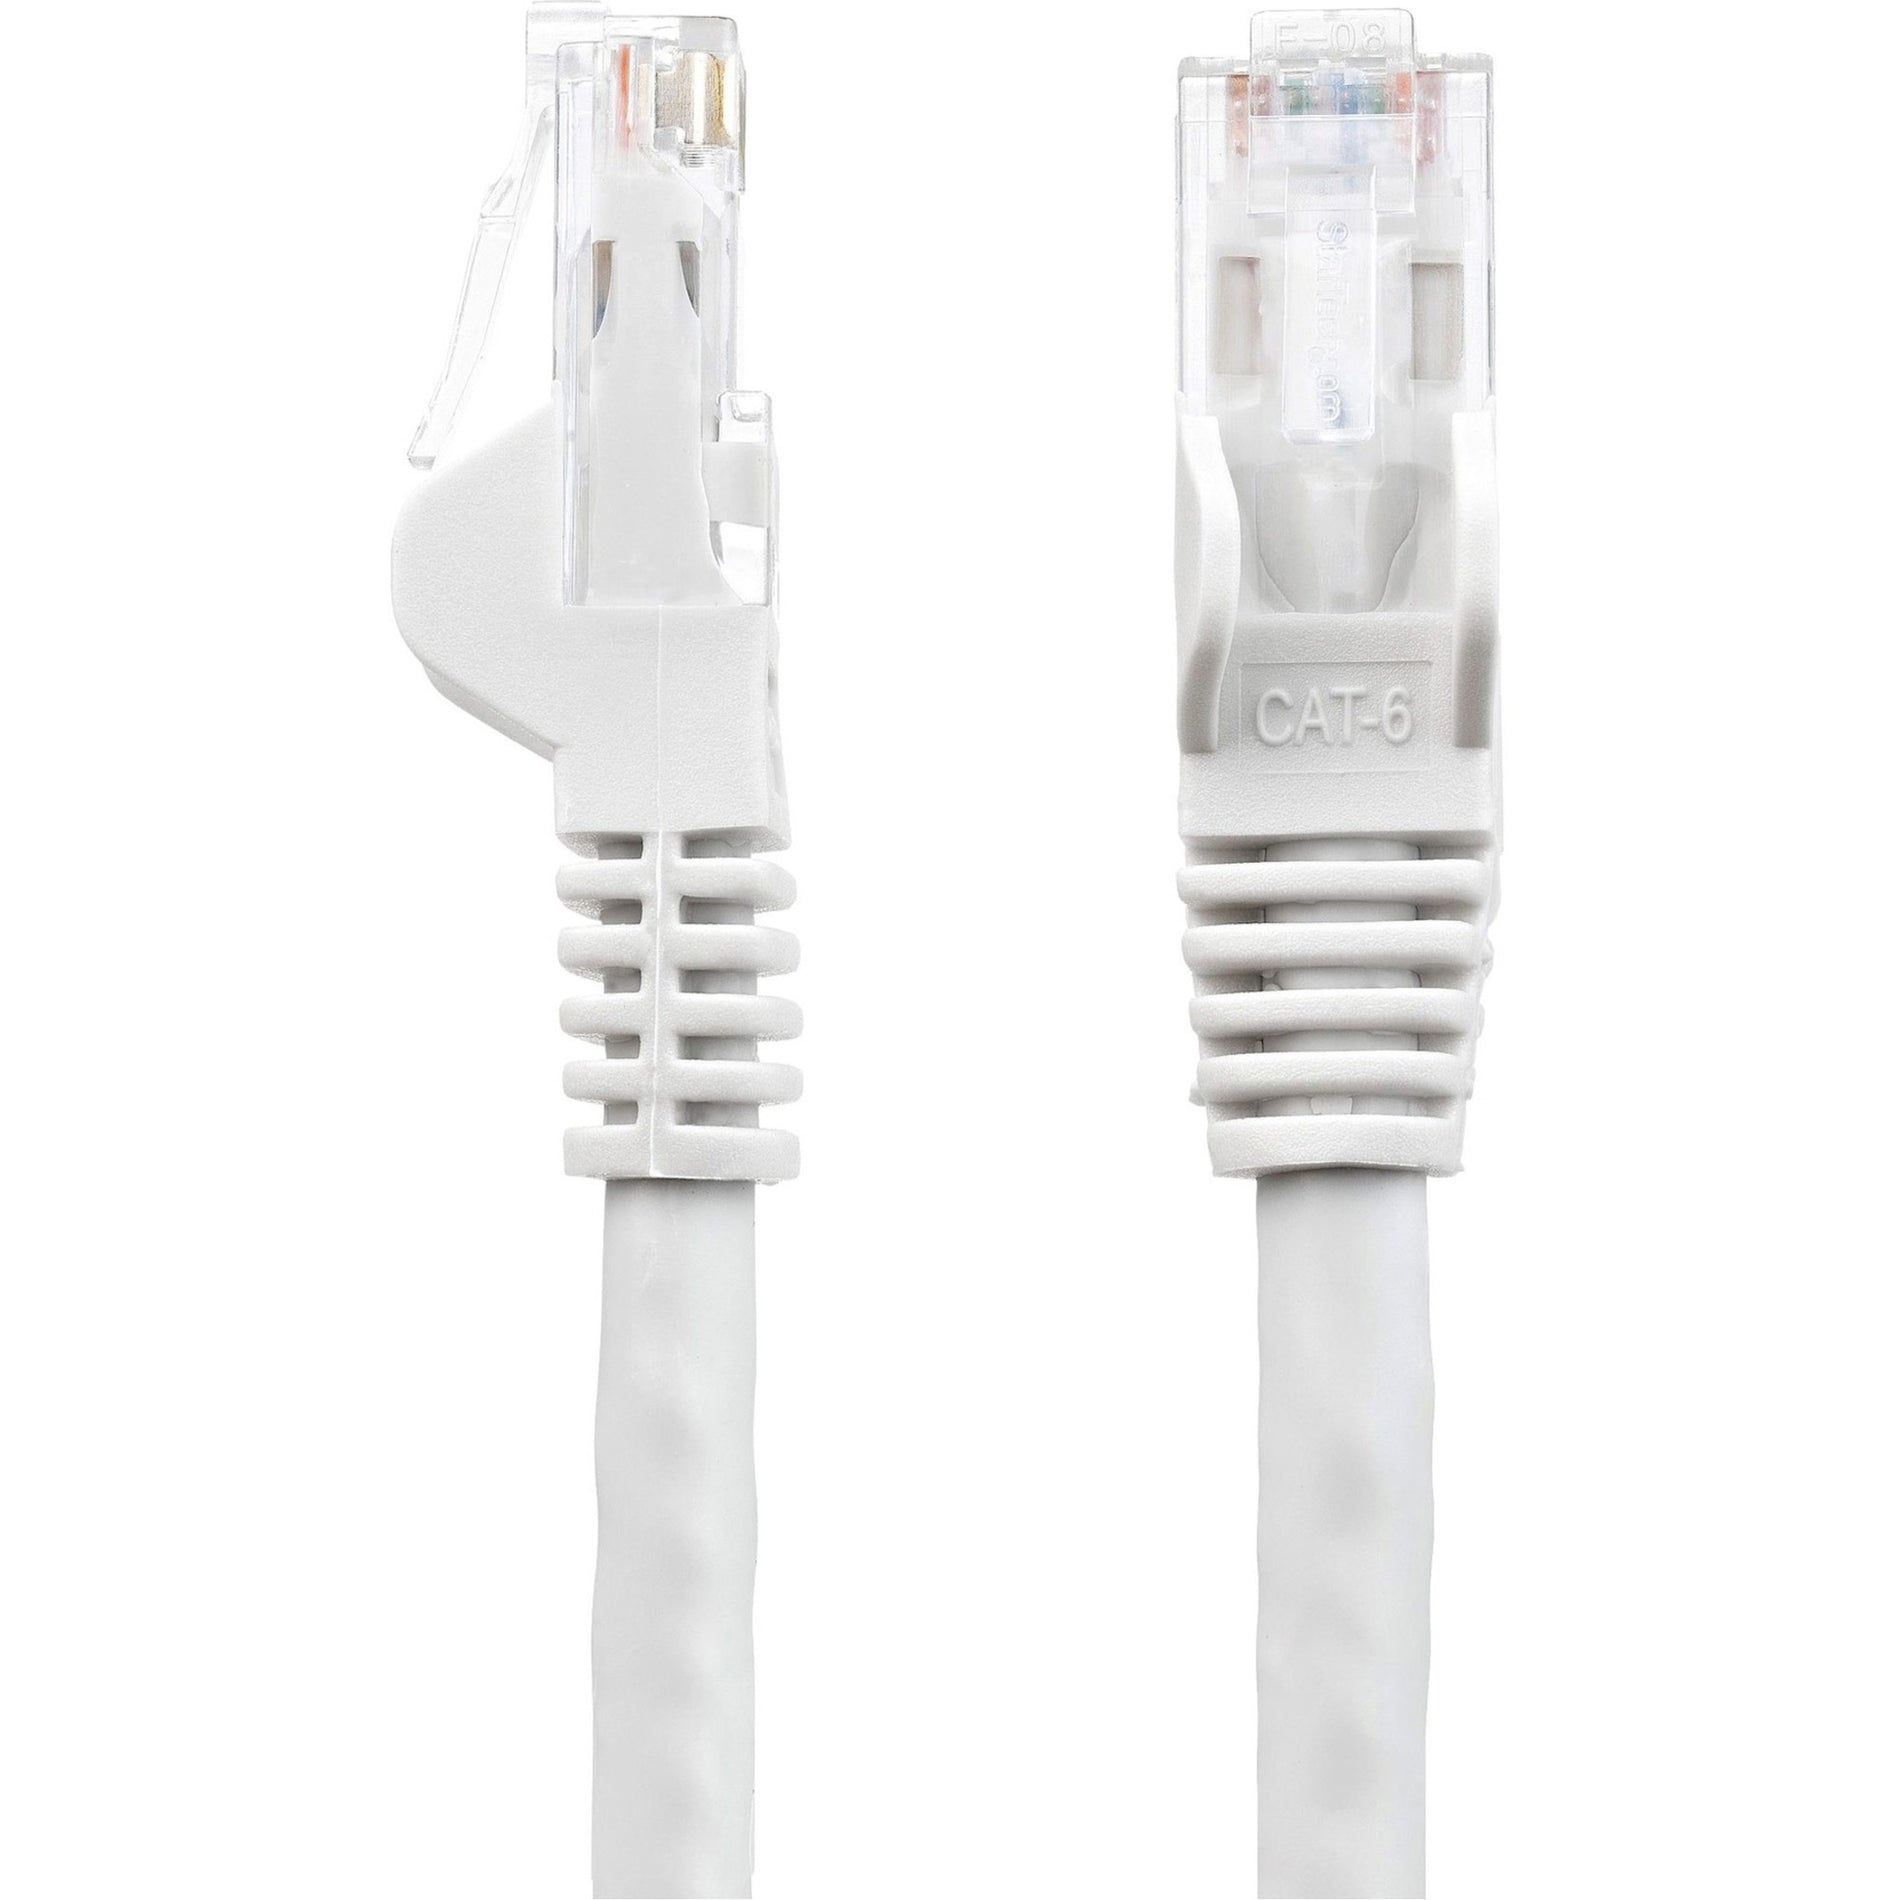 StarTech.com N6PATCH25WH 25 ft White Snagless Cat6 UTP Patch Cable, 10 Gbit/s Data Transfer Rate, Lifetime Warranty